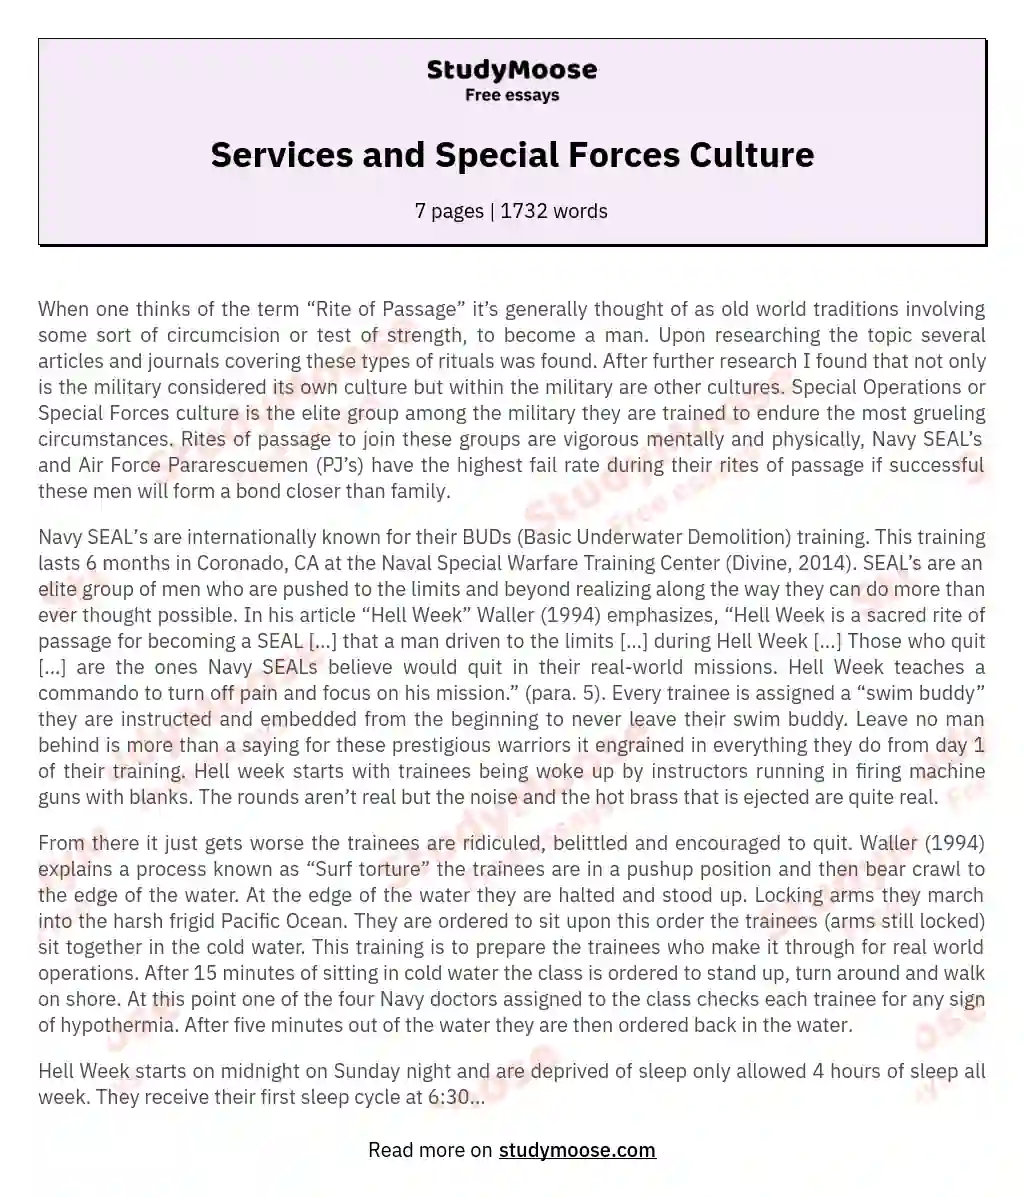 Services and Special Forces Culture